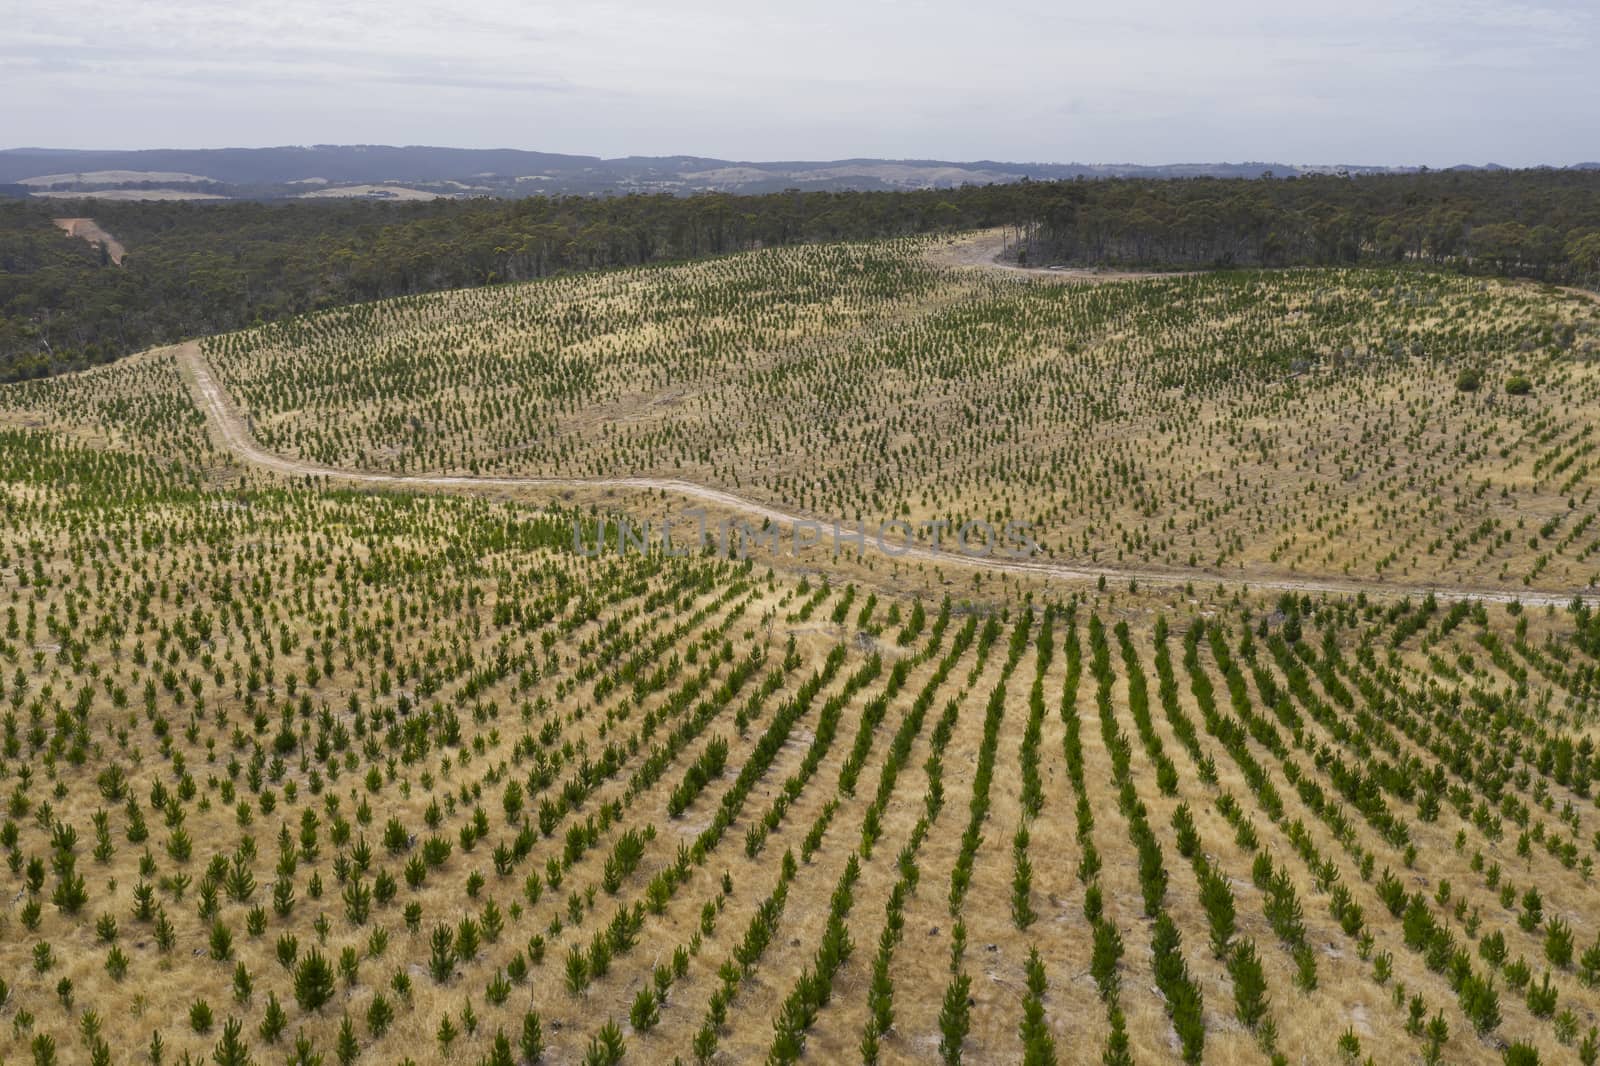 Aerial view of a pine tree farm in regional Australia by WittkePhotos